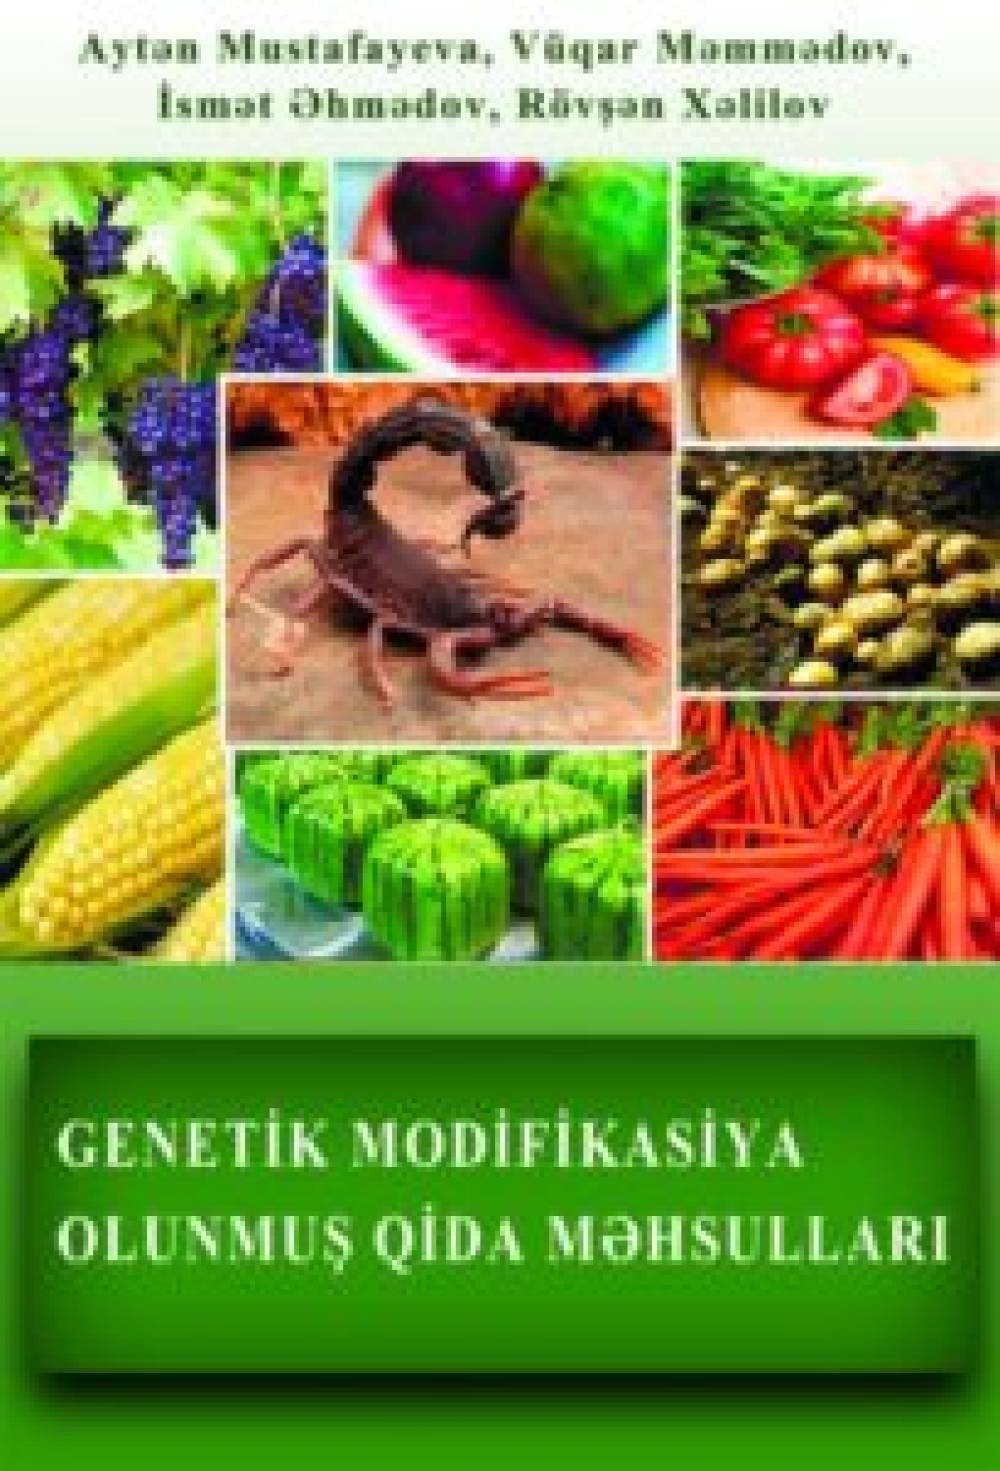 Genetically modified food products